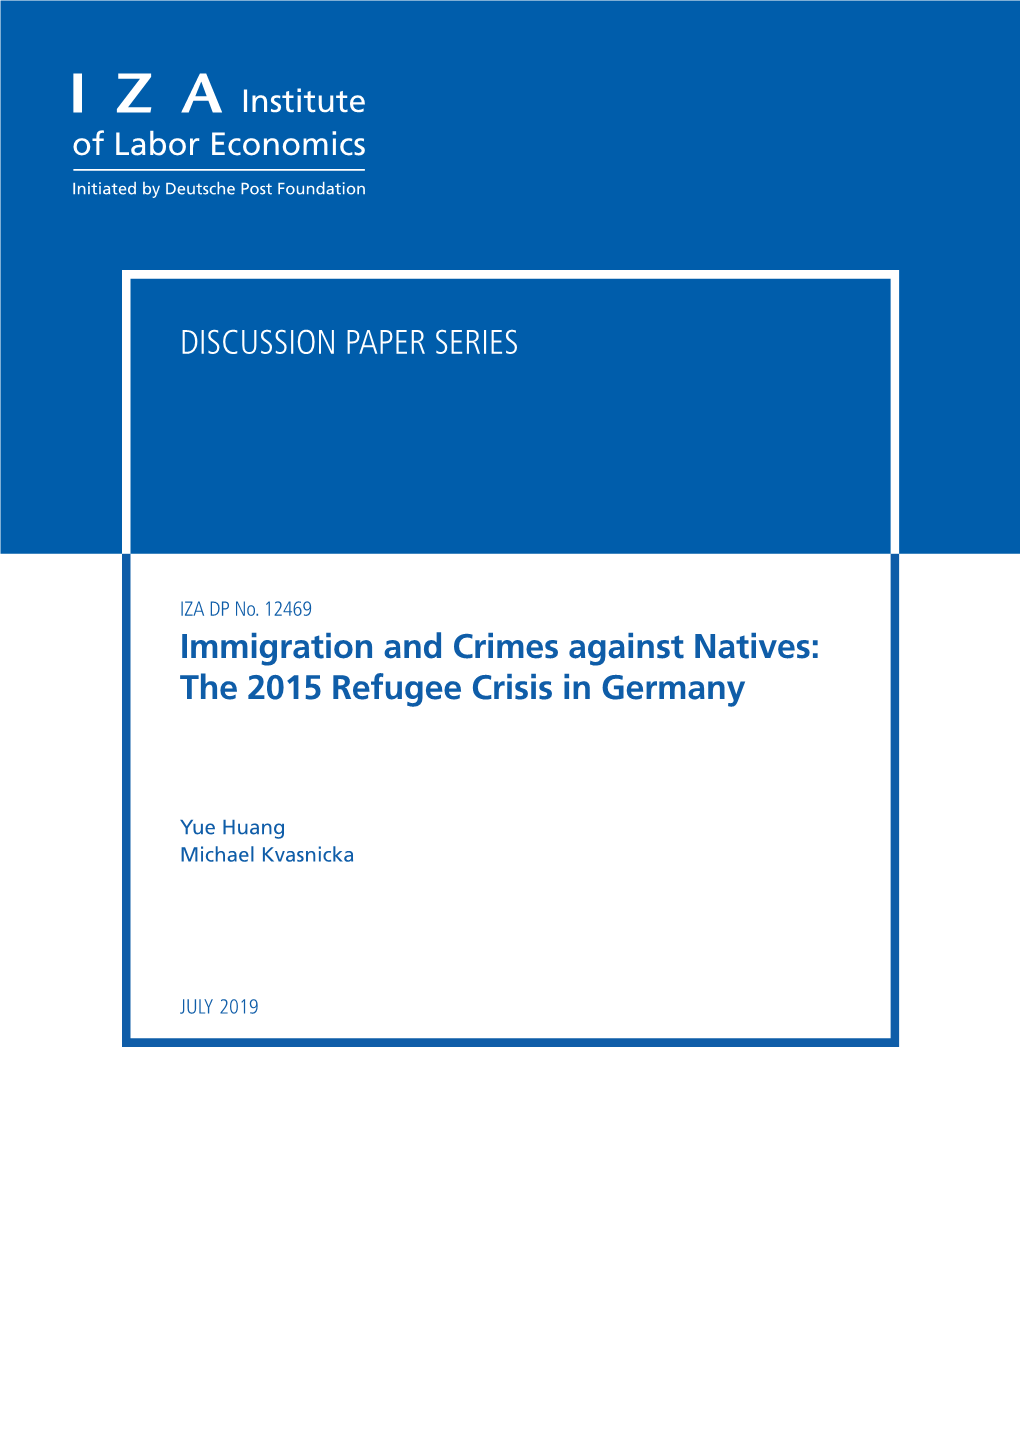 Immigration and Crimes Against Natives: the 2015 Refugee Crisis in Germany